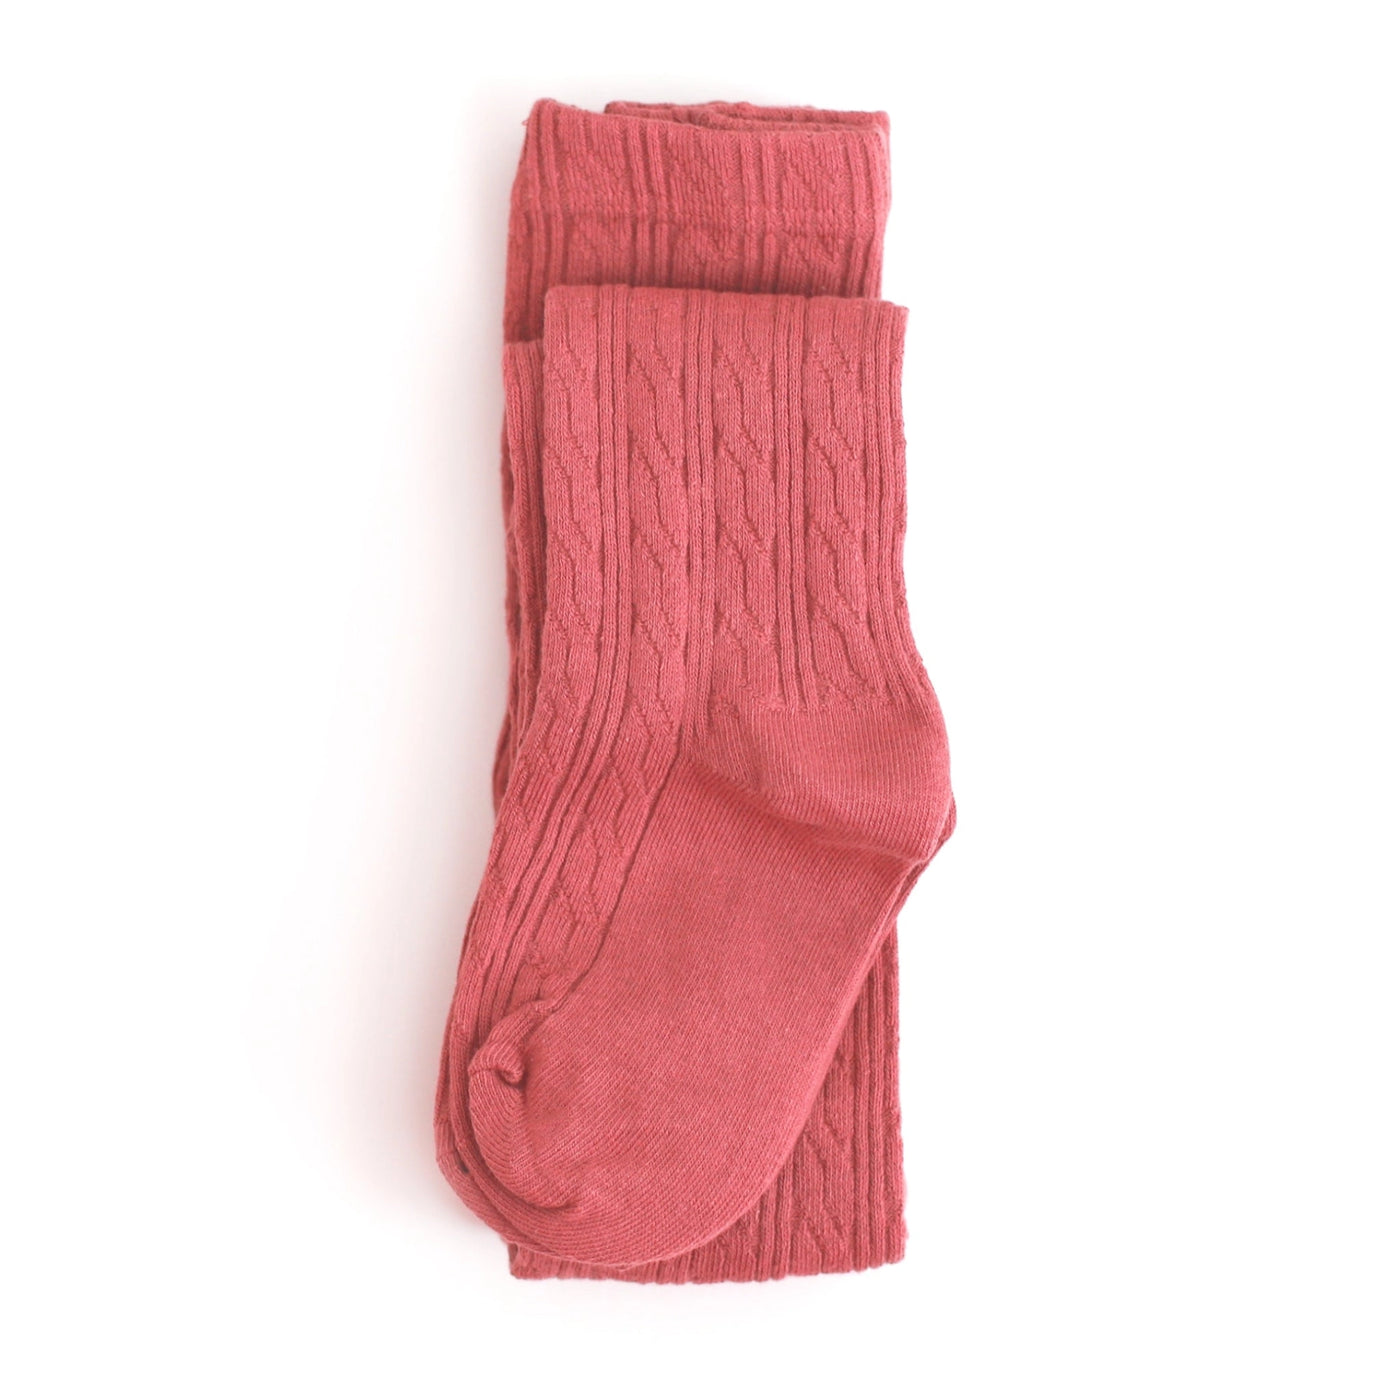 strawberry cable knit tights